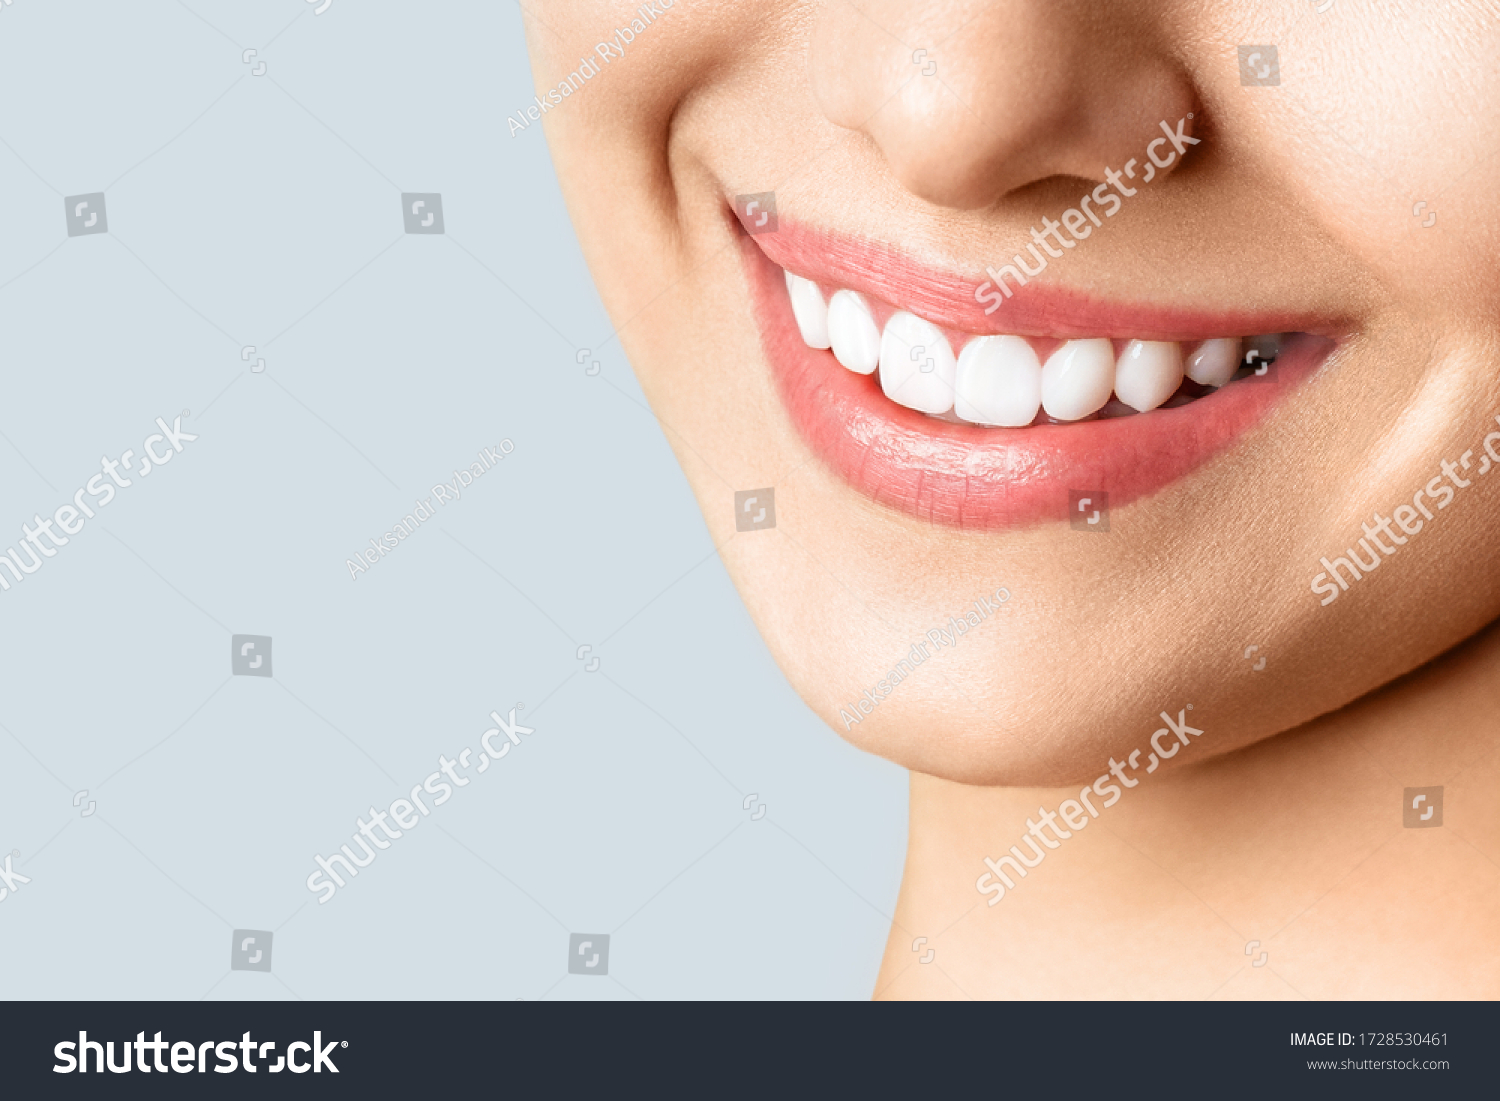 Beautiful female smile after teeth whitening procedure. Dental care. Dentistry concept. #1728530461